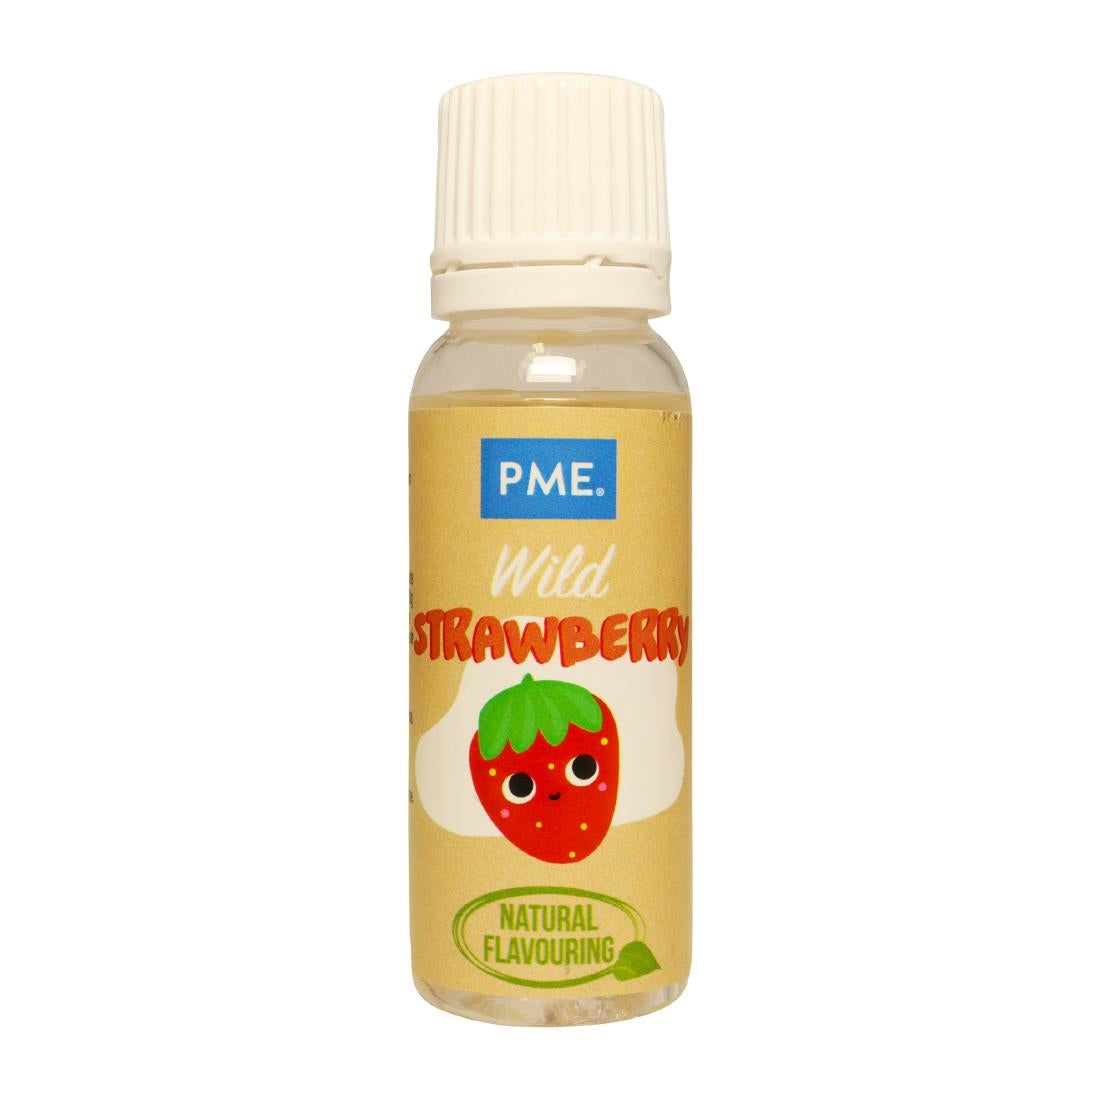 HU250 PME 100% Natural Flavour Strawberry 25g